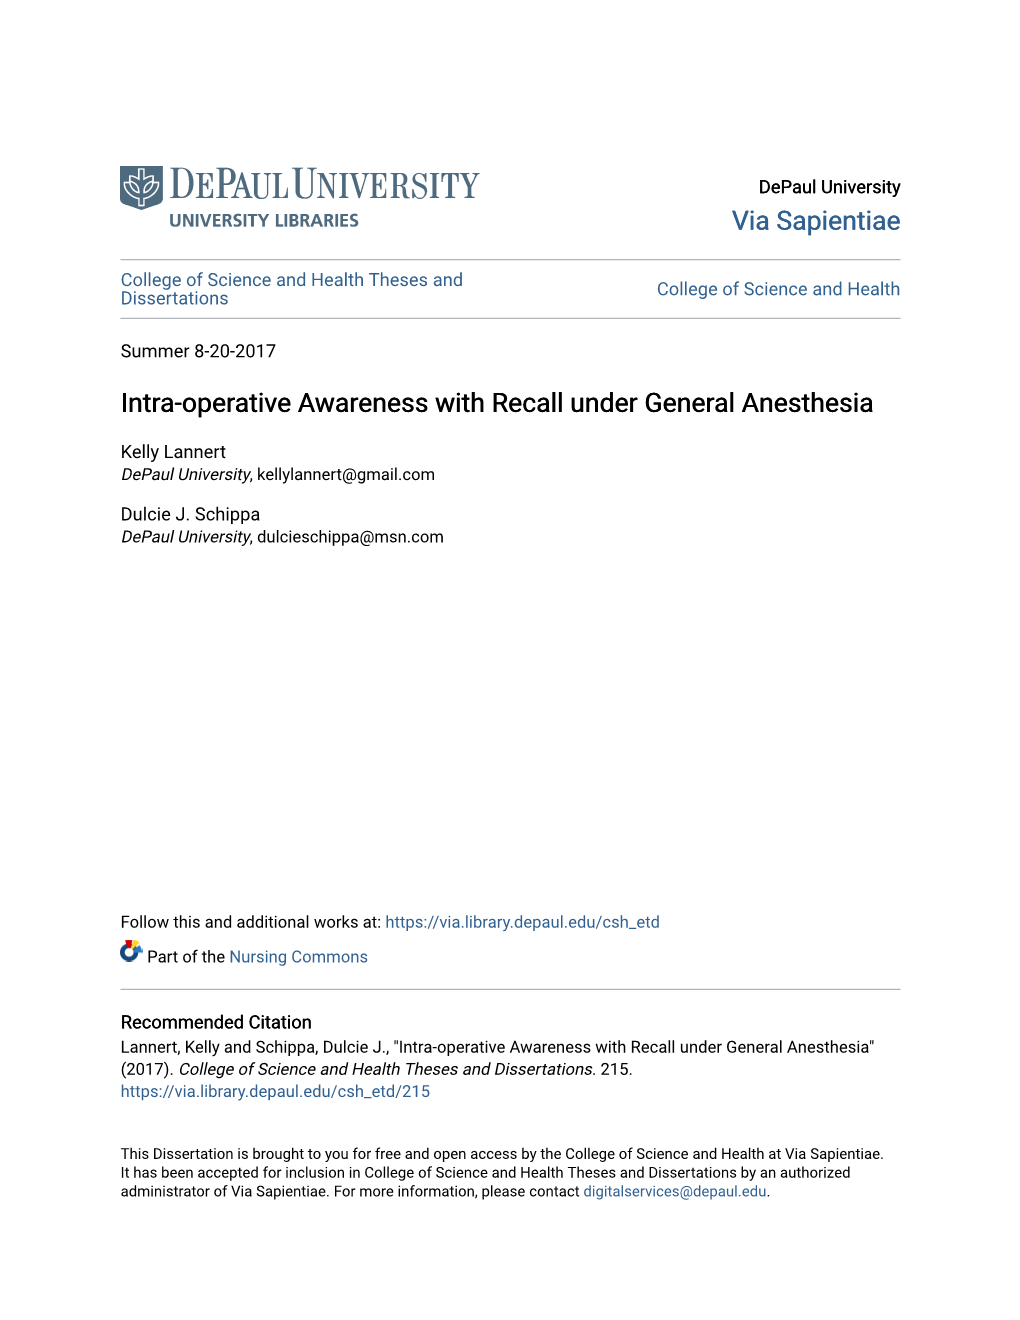 Intra-Operative Awareness with Recall Under General Anesthesia